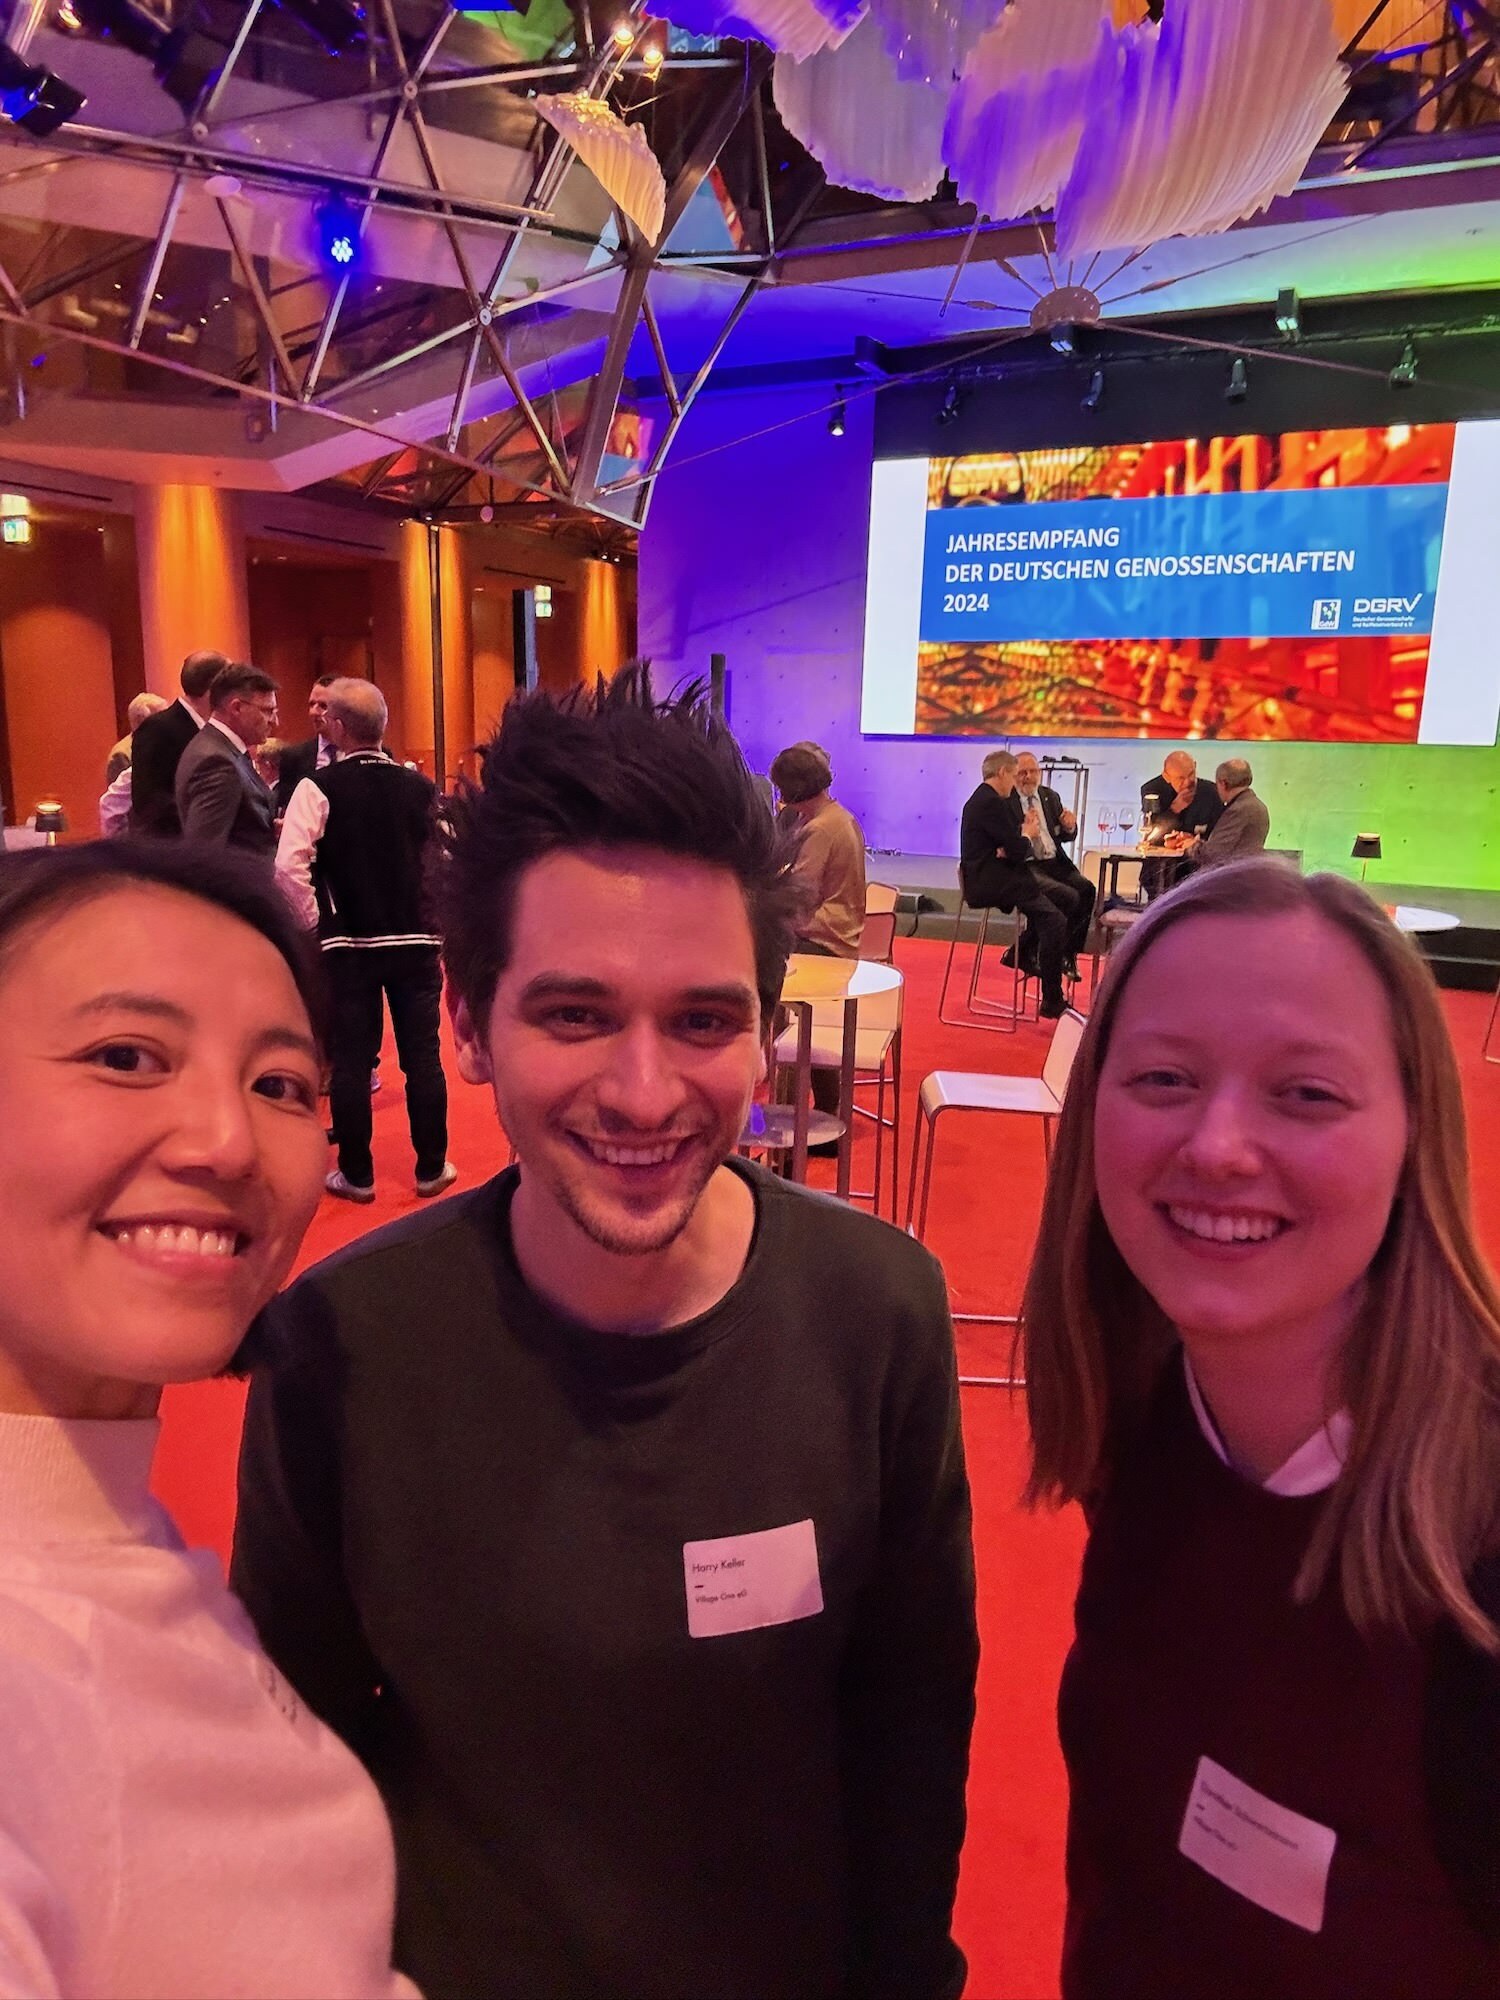 Selfie of three people from Village One in an event space, stage visible in the background with a powerpoint slide that says “Jahresempfang der deutschen Genossenschaften”, colorful lighting